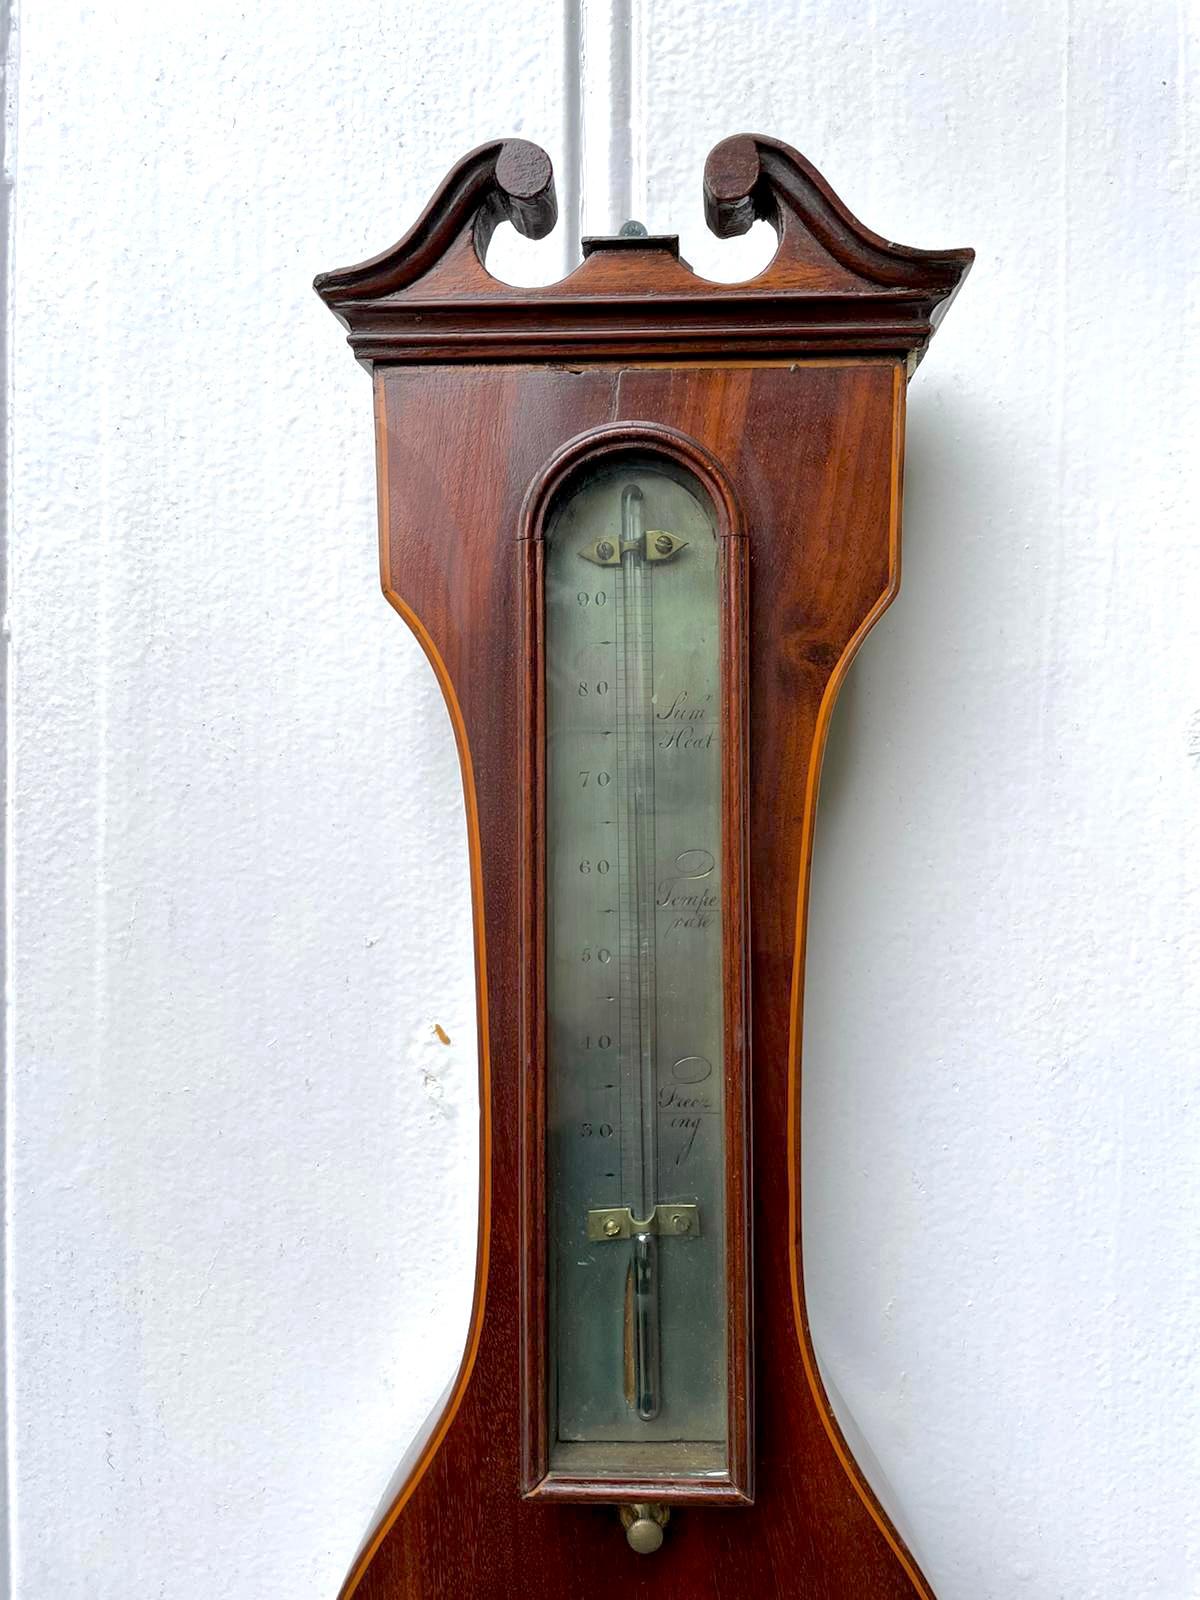 Antique George III mahogany and boxwood inlaid banjo barometer having a quality swan neck pediment, 10 inch silvered engraved dial with hygrometer, thermometer and spirit level, original brass bezel and hands. Signed C Marinone.

In perfect